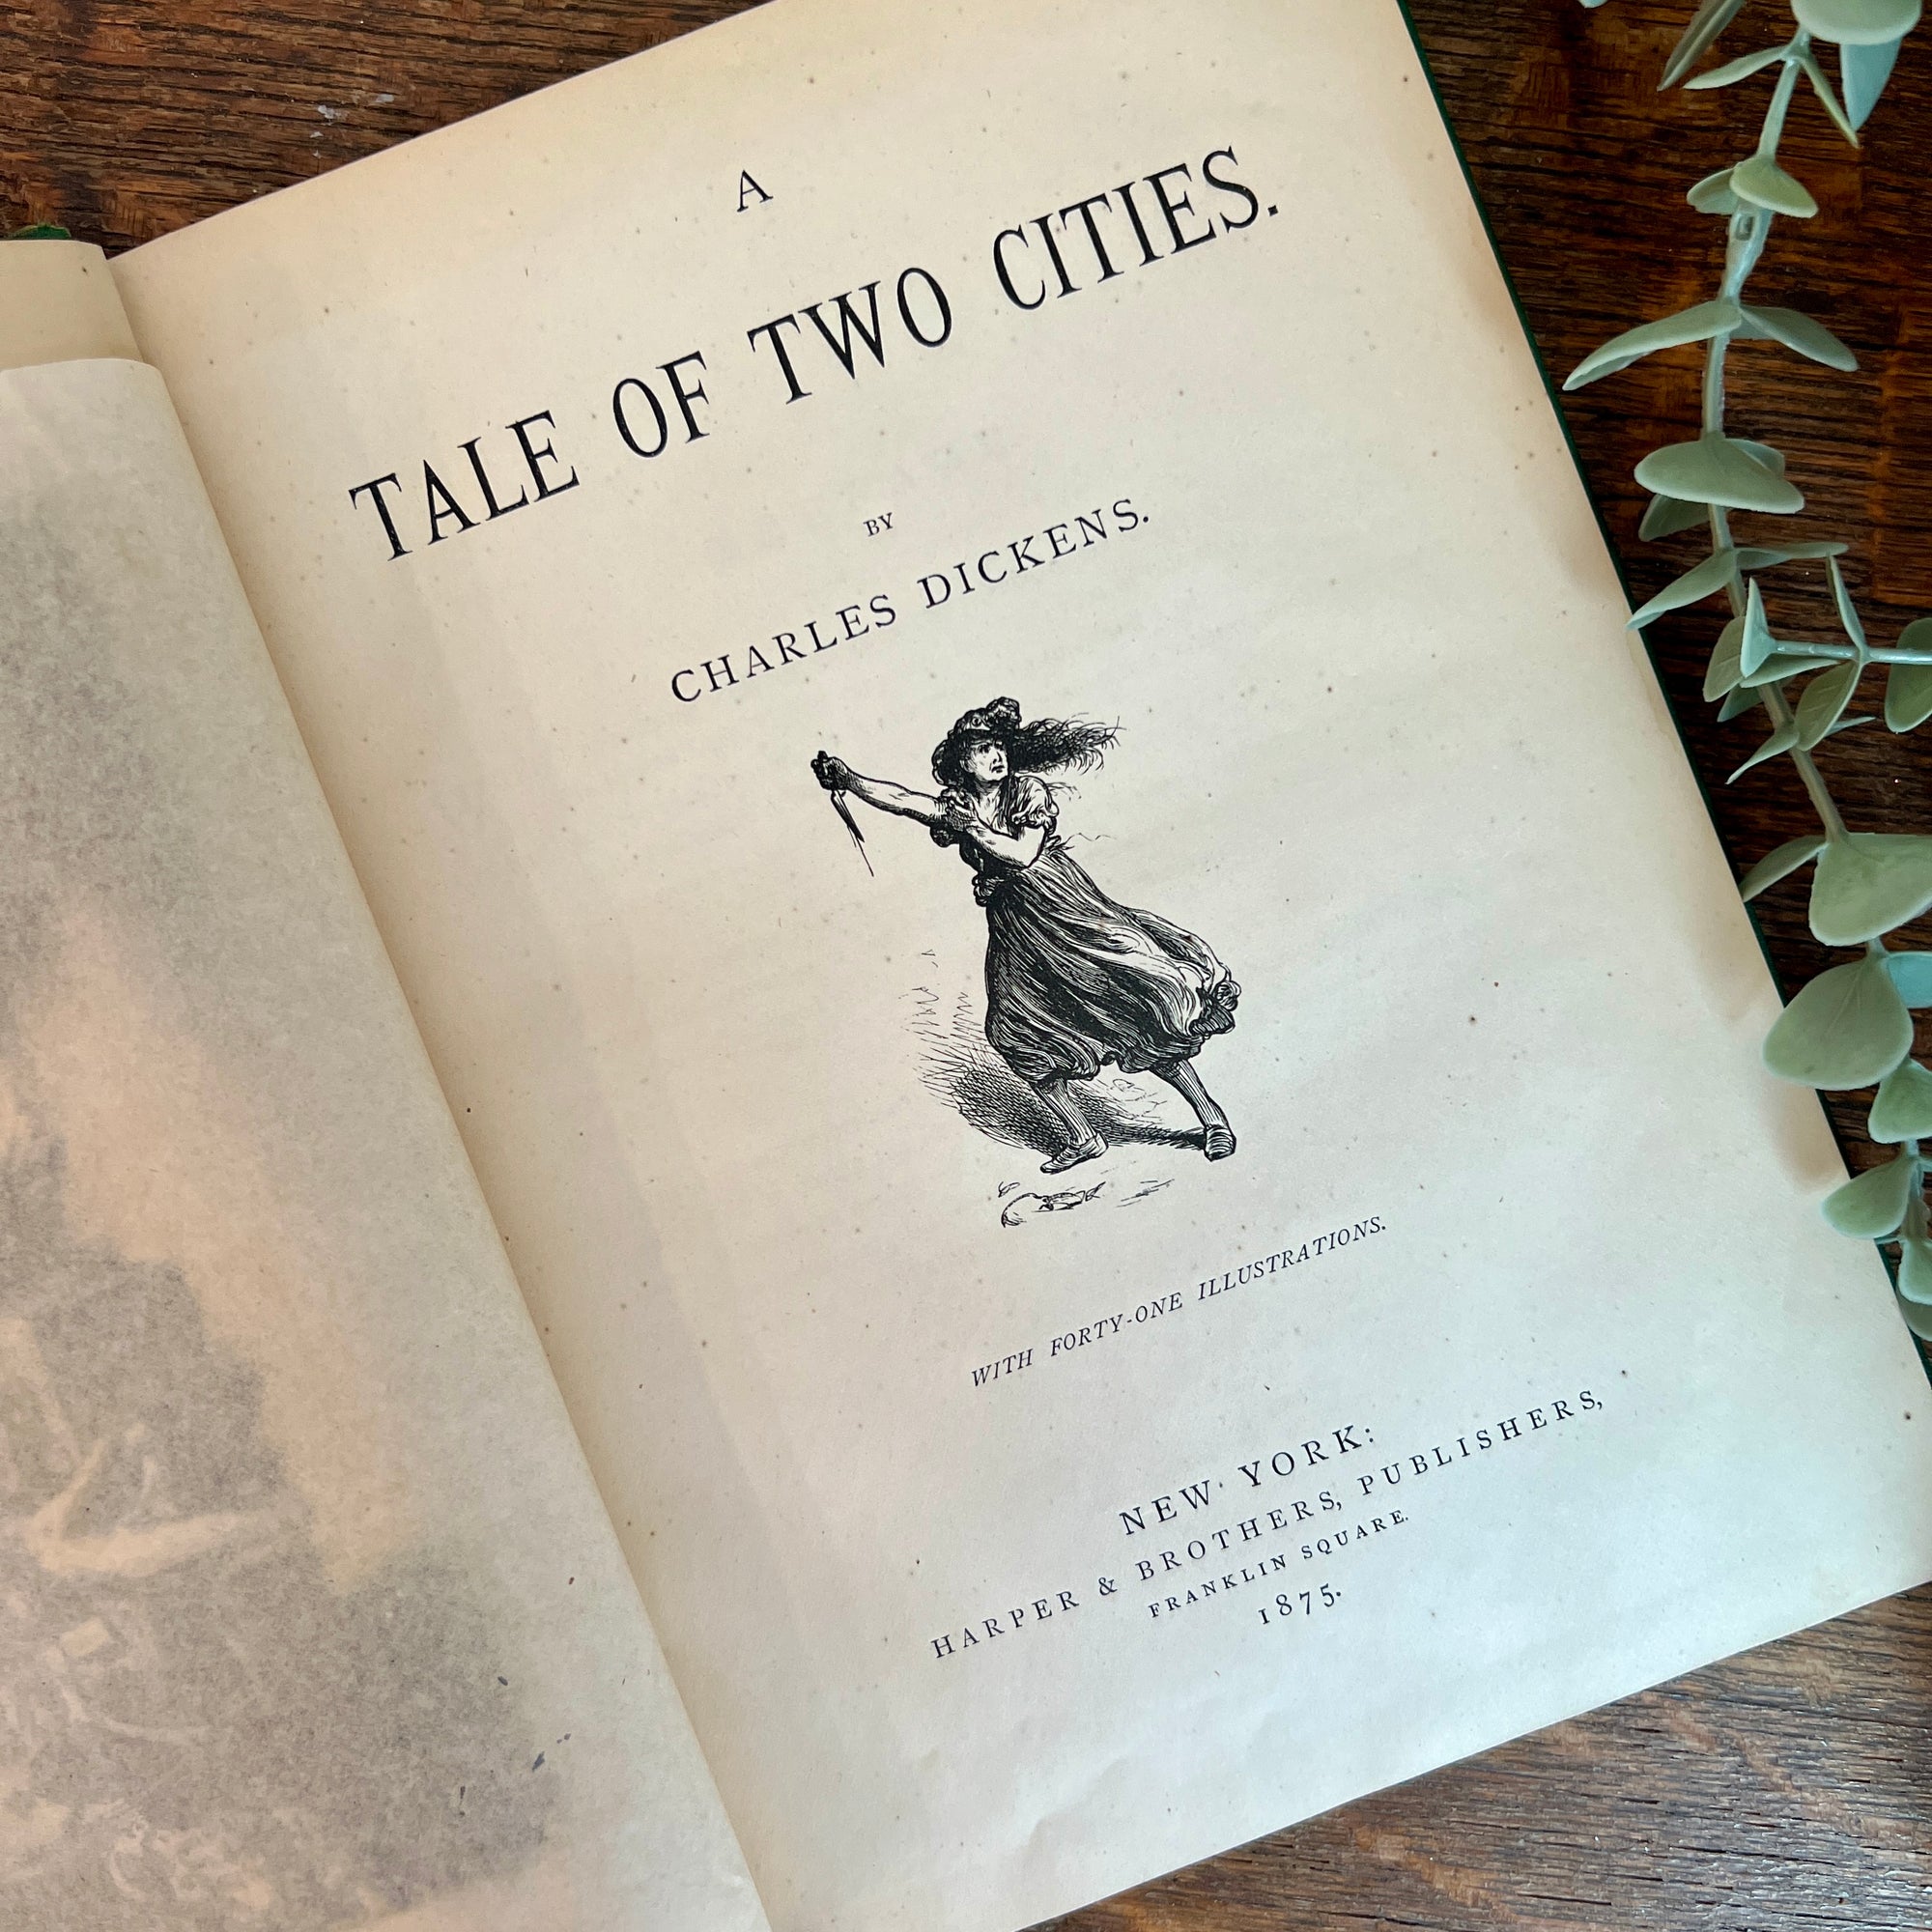 1875 Charles Dicken 'Tale of Two Cities' Household Edition